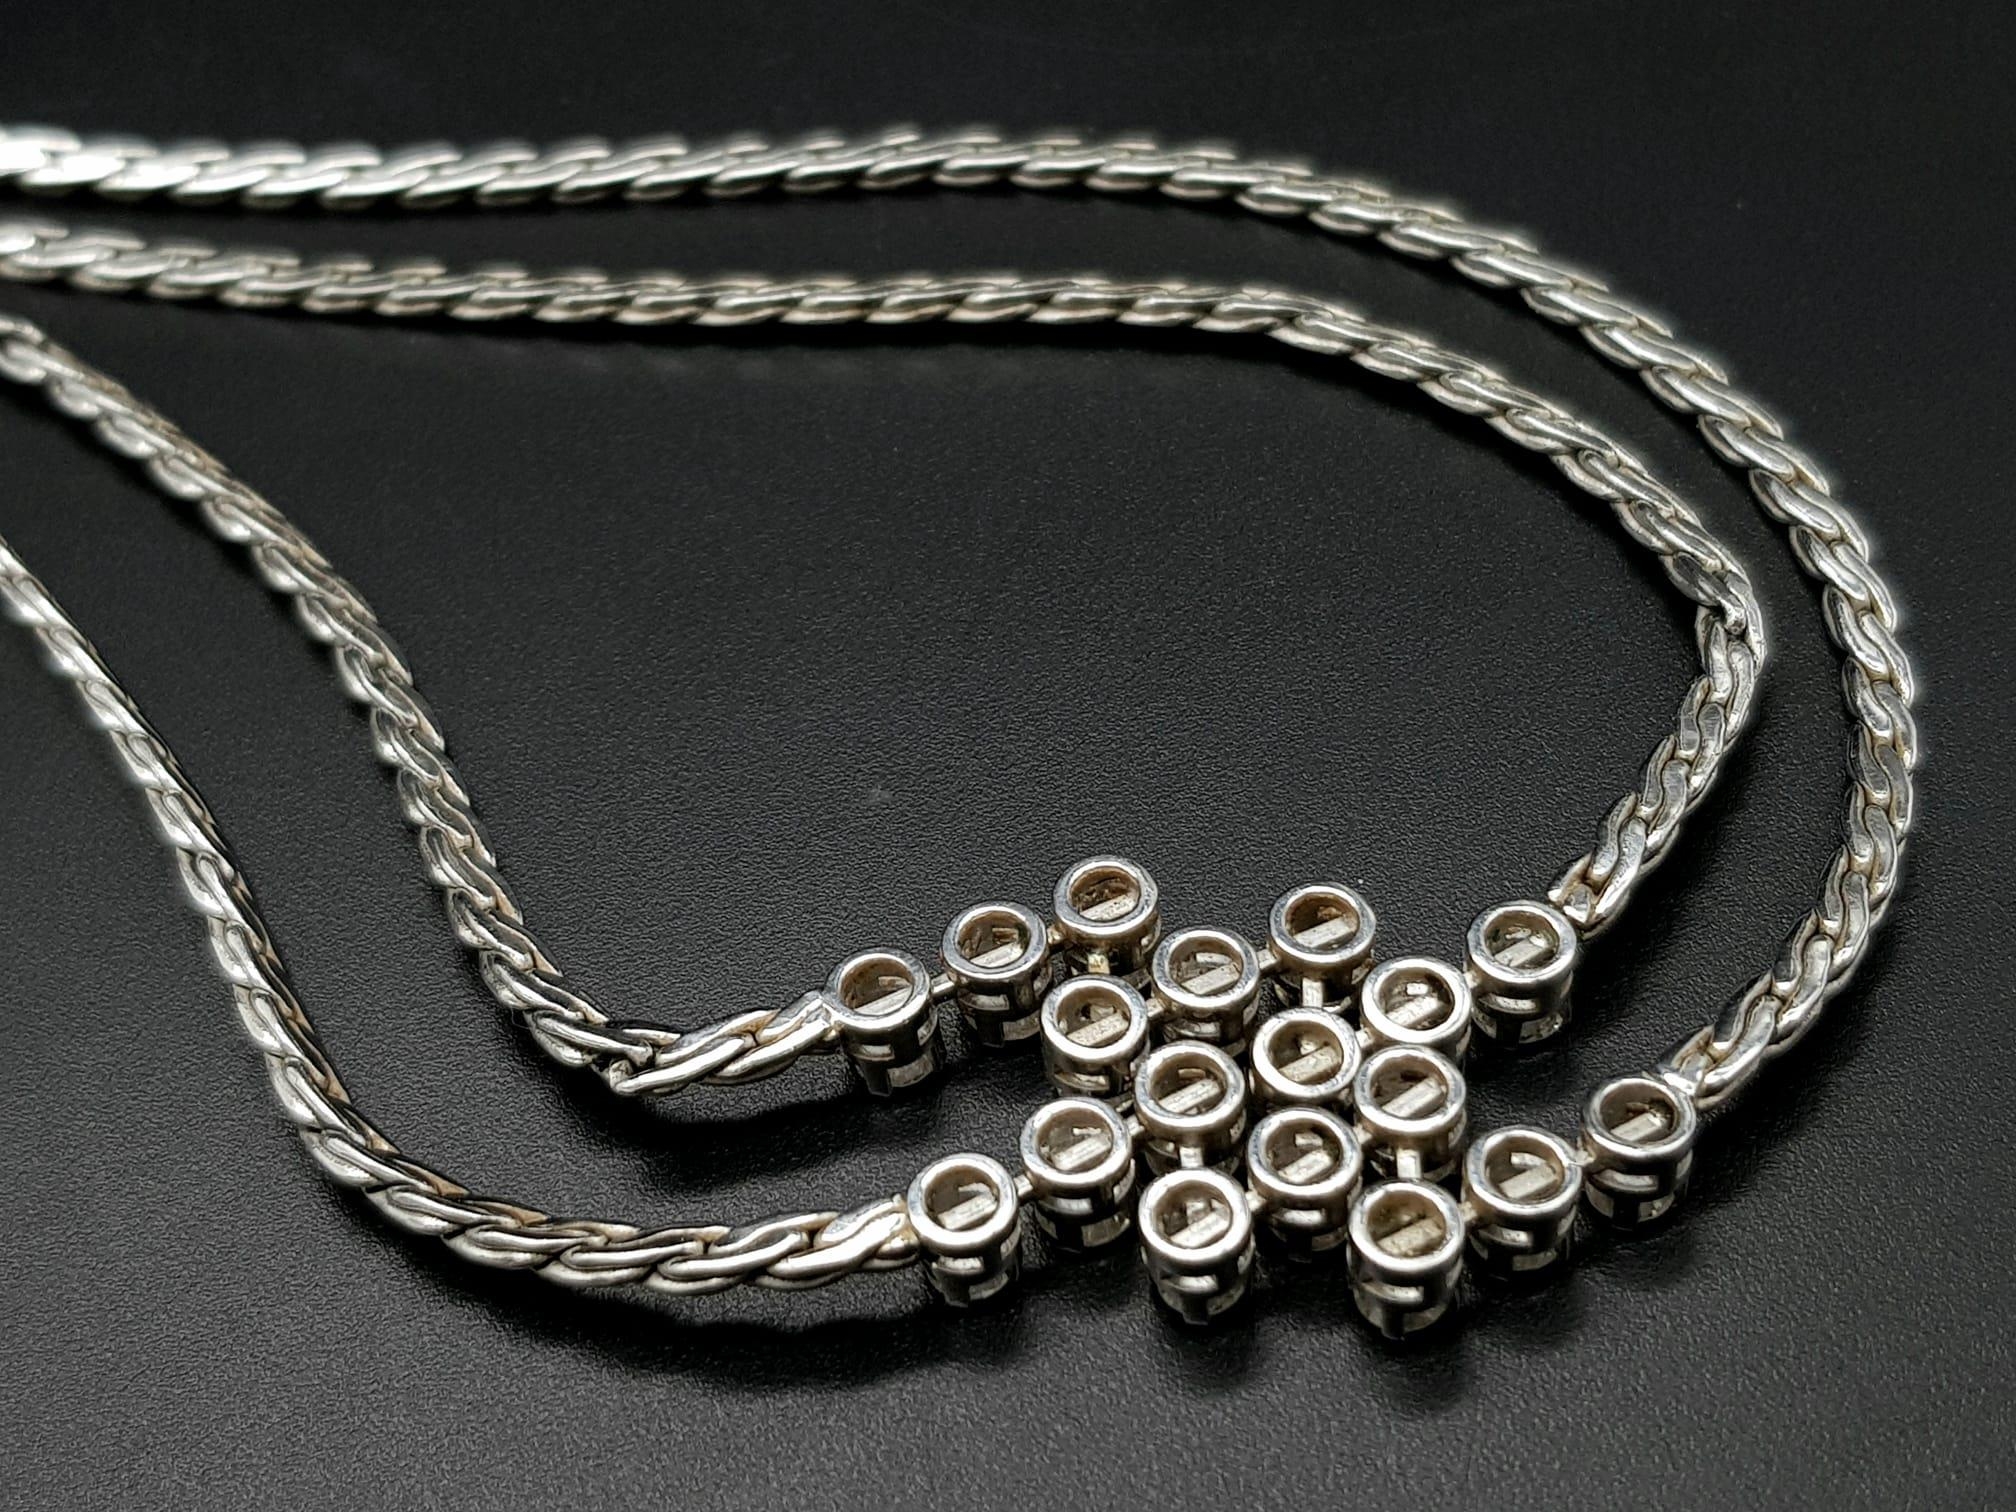 A Beautiful 14K White Gold and Diamond Two Row Necklace. 18 diamonds - 3.6ctw of brilliant round cut - Image 12 of 17